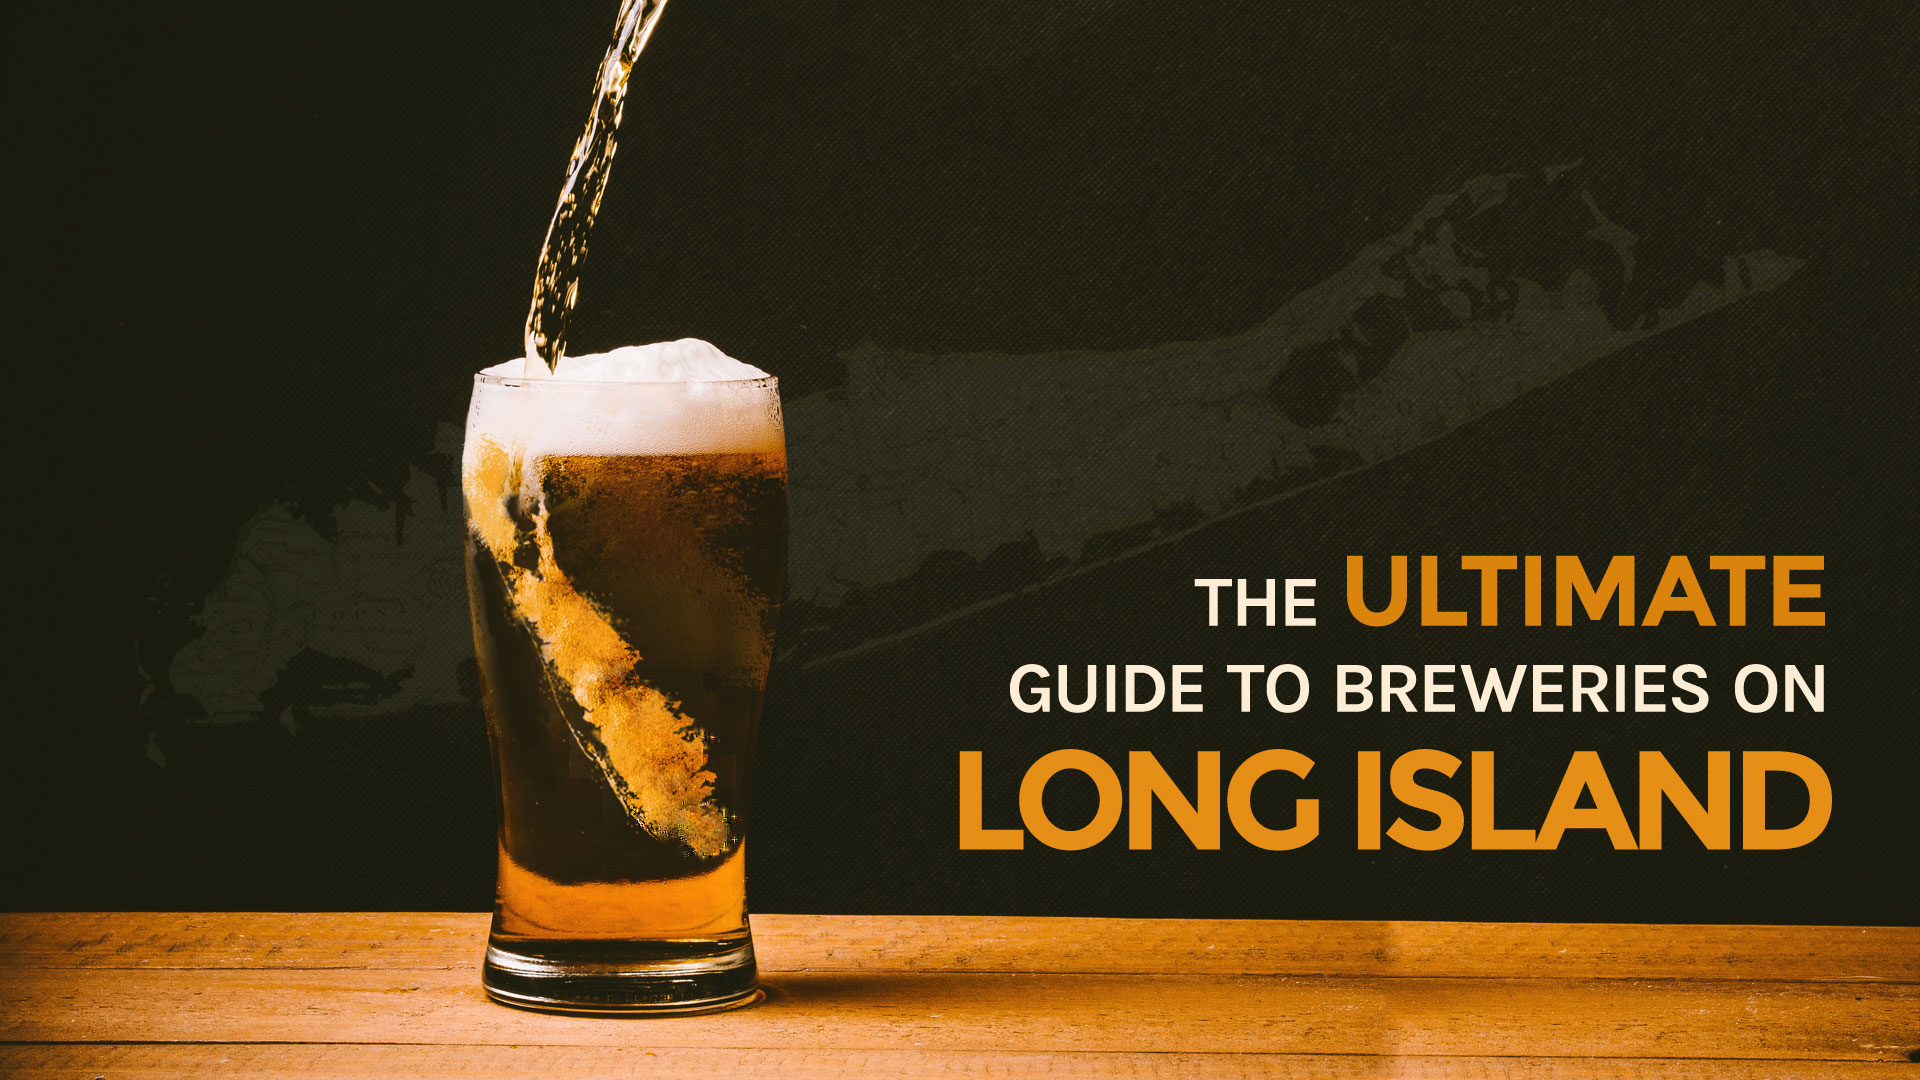 Long Island Craft Beer and Breweries